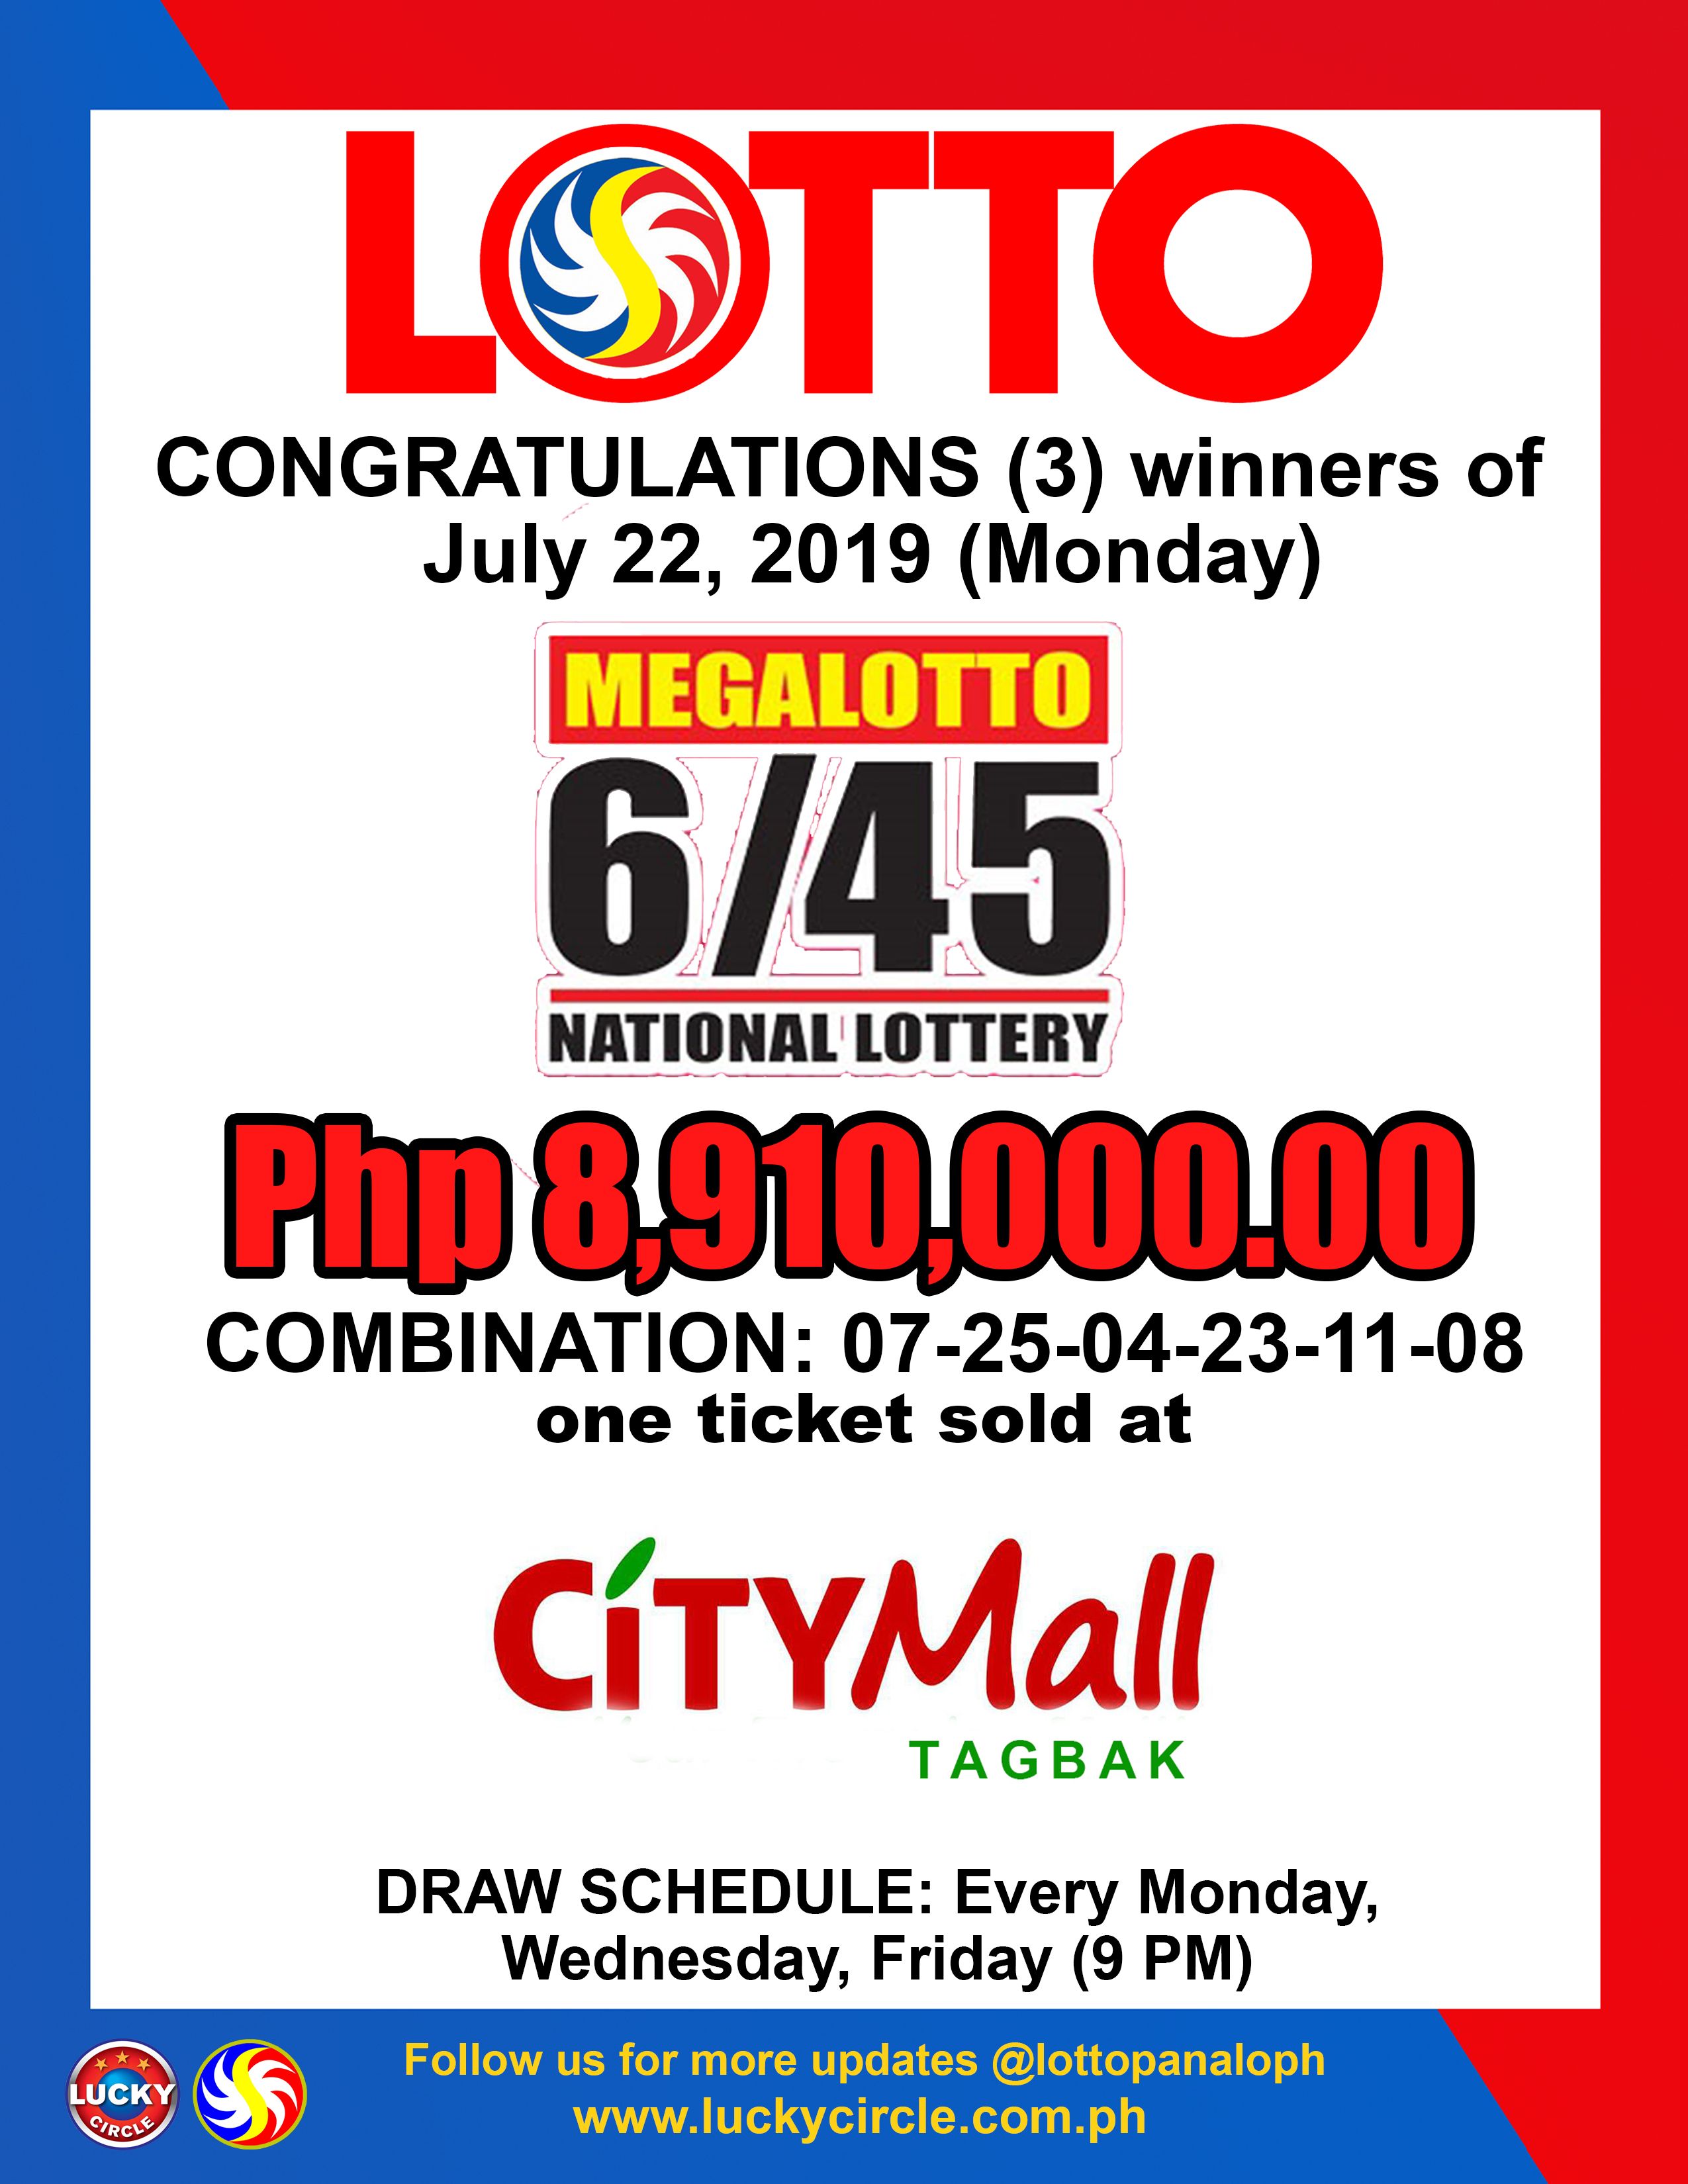 lotto draw schedule 2019